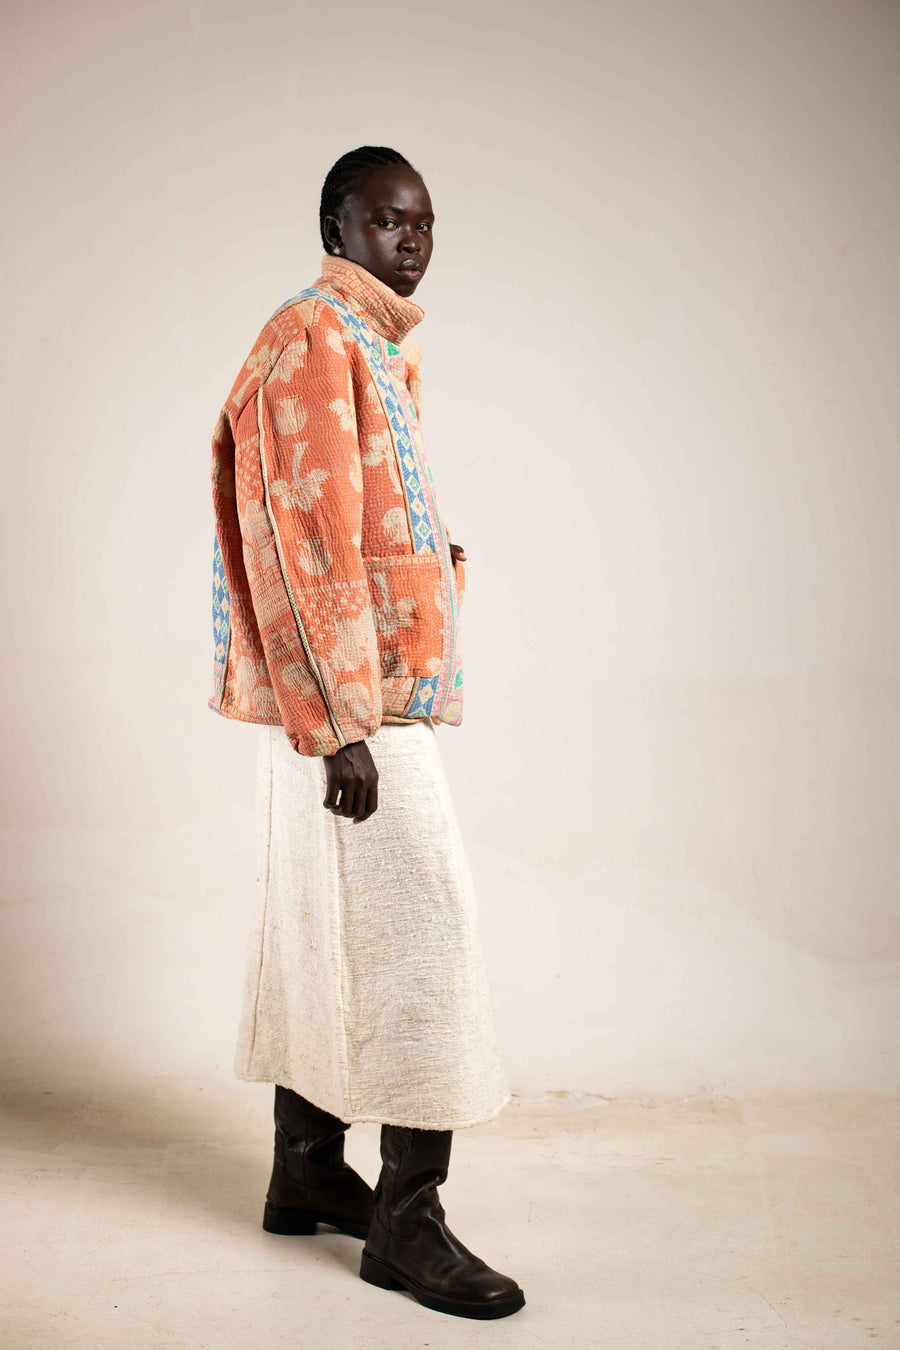 The Kantha Puffer Jacket S/M 09